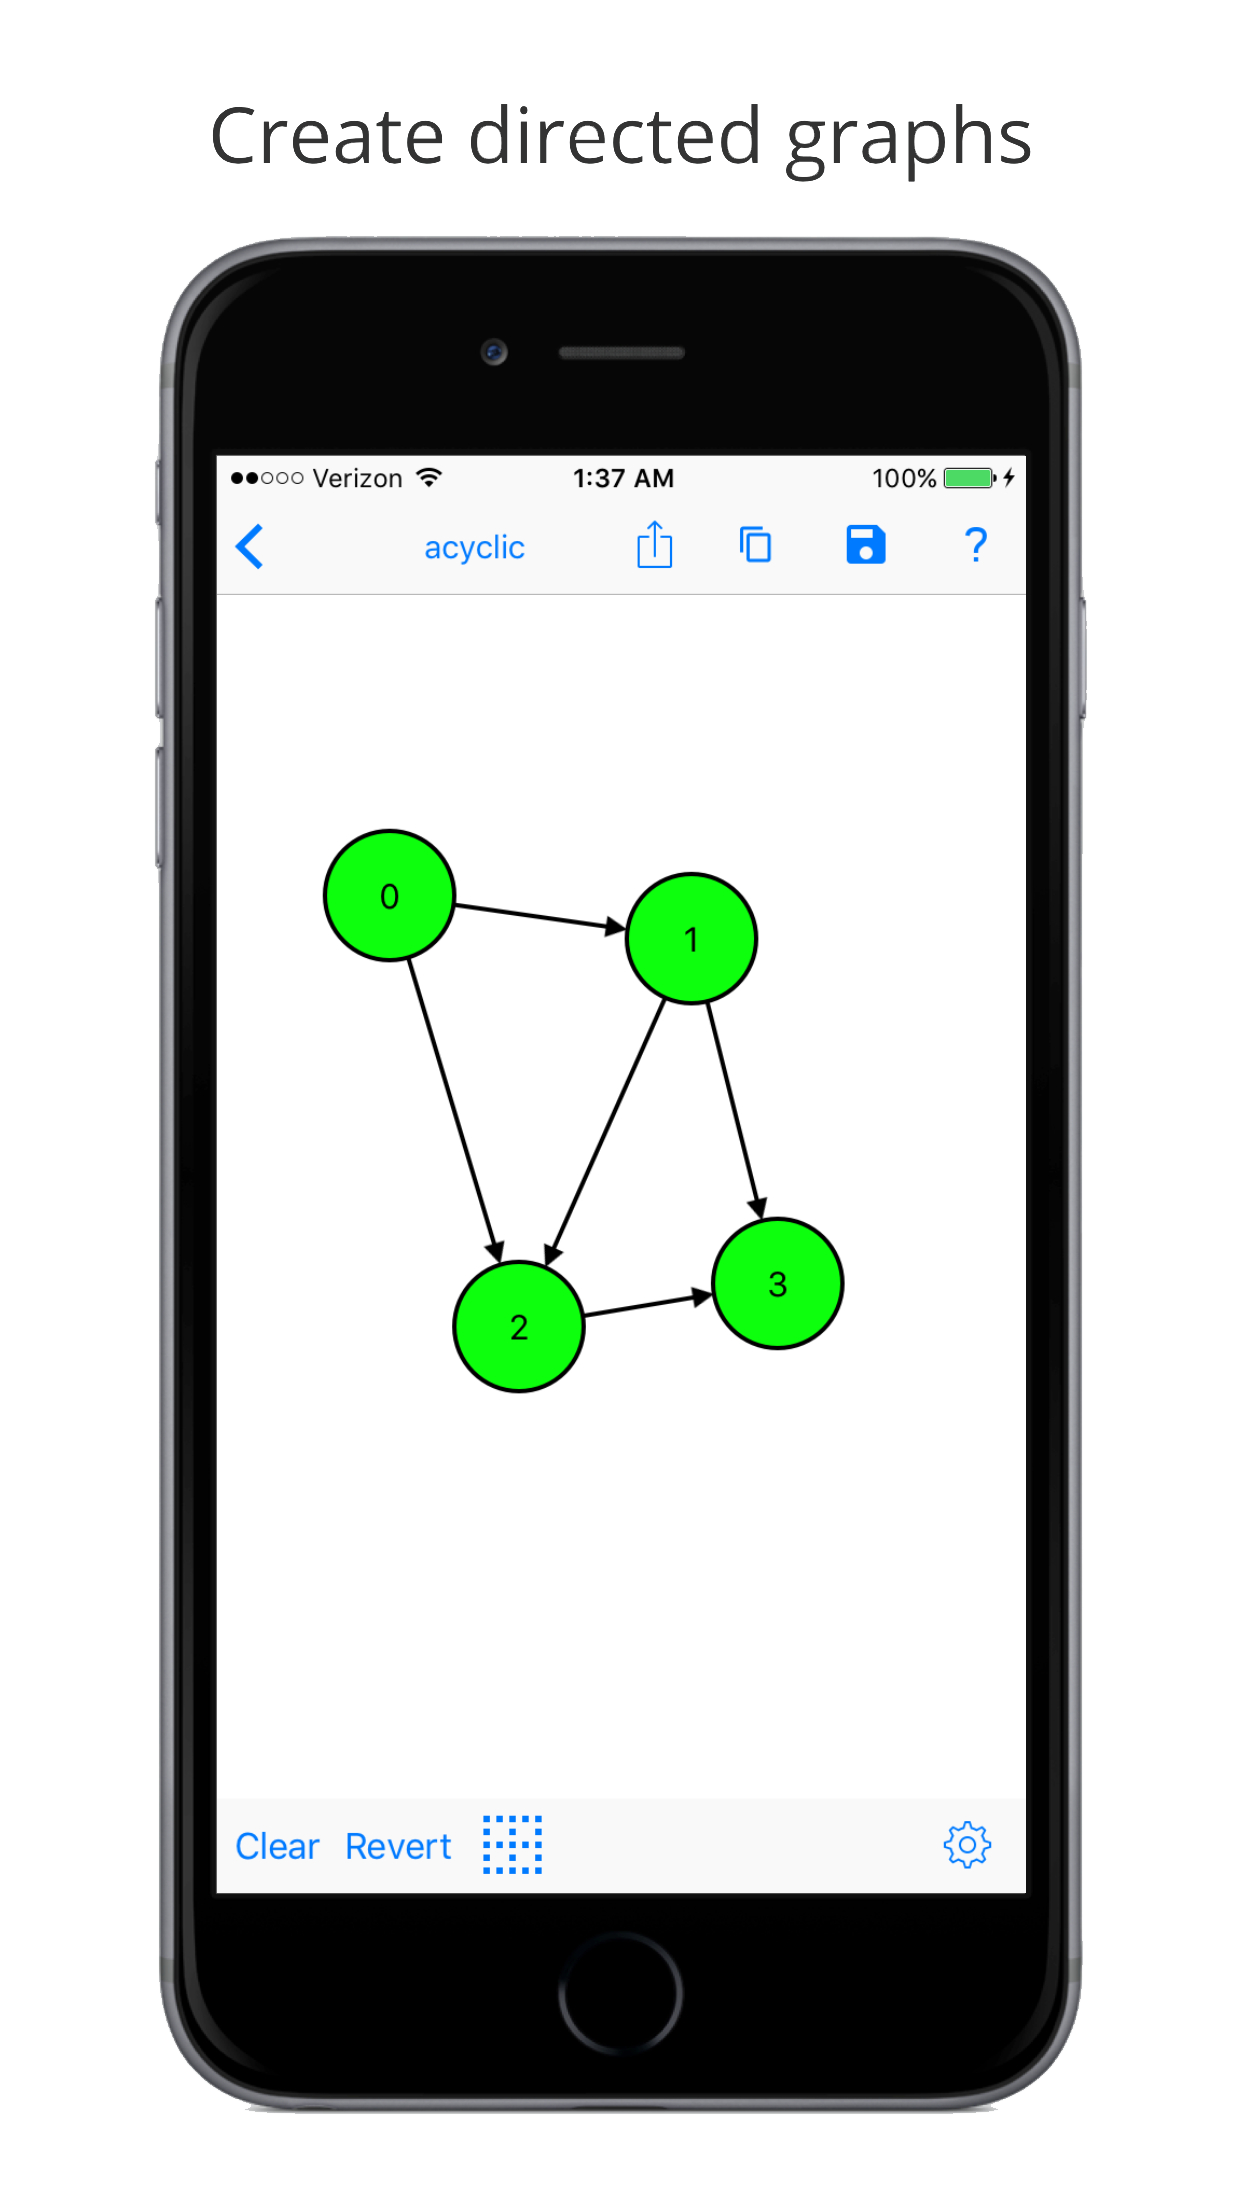 Create directed graphs